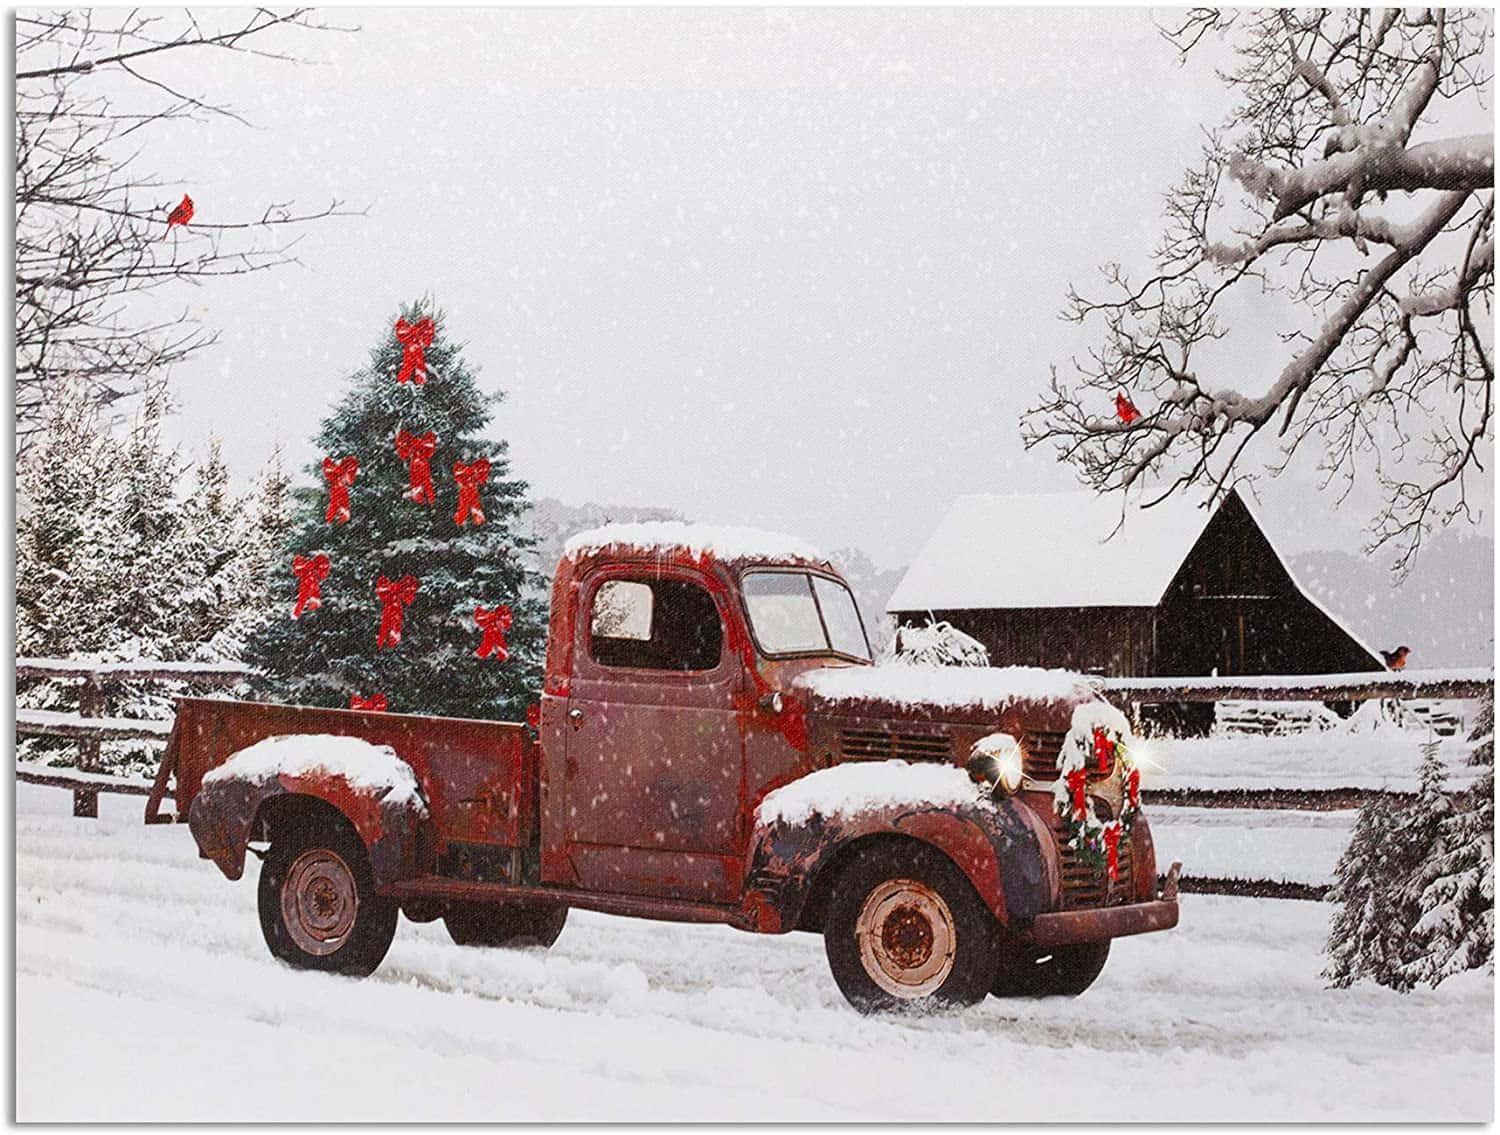 'A Vintage Truck With a Festive Christmas Schedule' Wallpaper